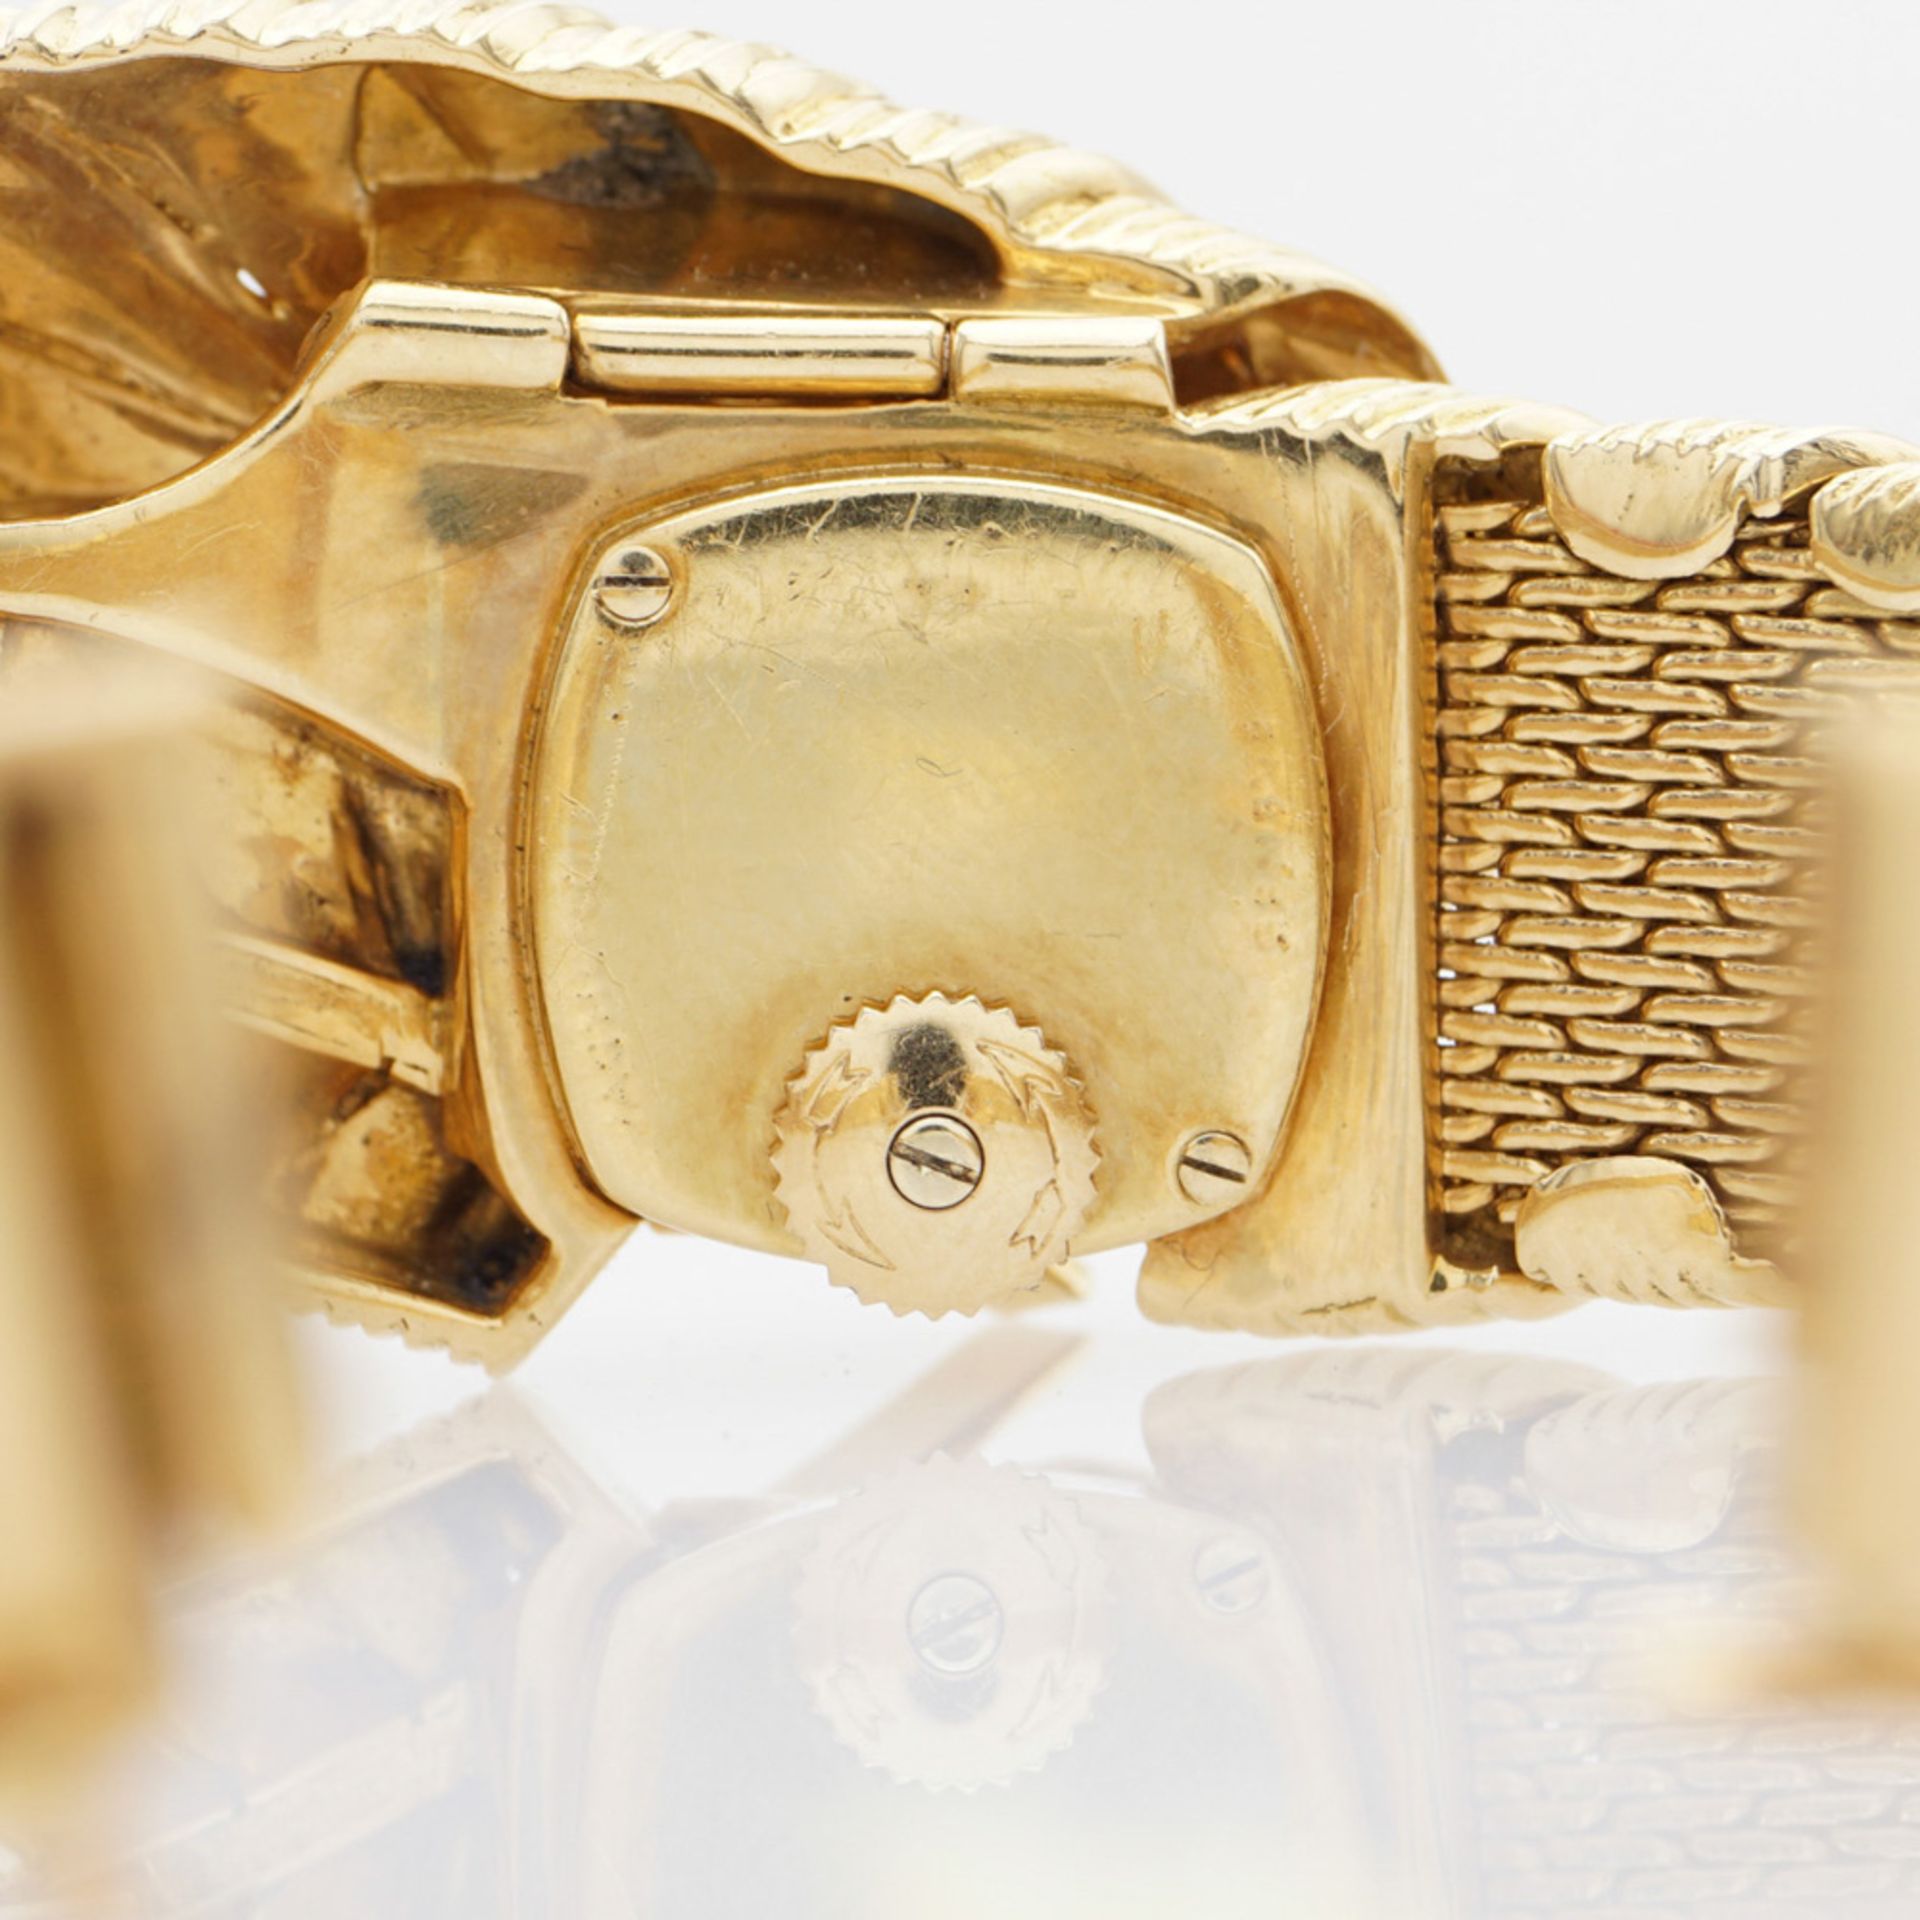 Vacheron & Constantin, 18kt yellow gold and diamond watch bracelet French marks, 1950/60s weight 69, - Image 3 of 3